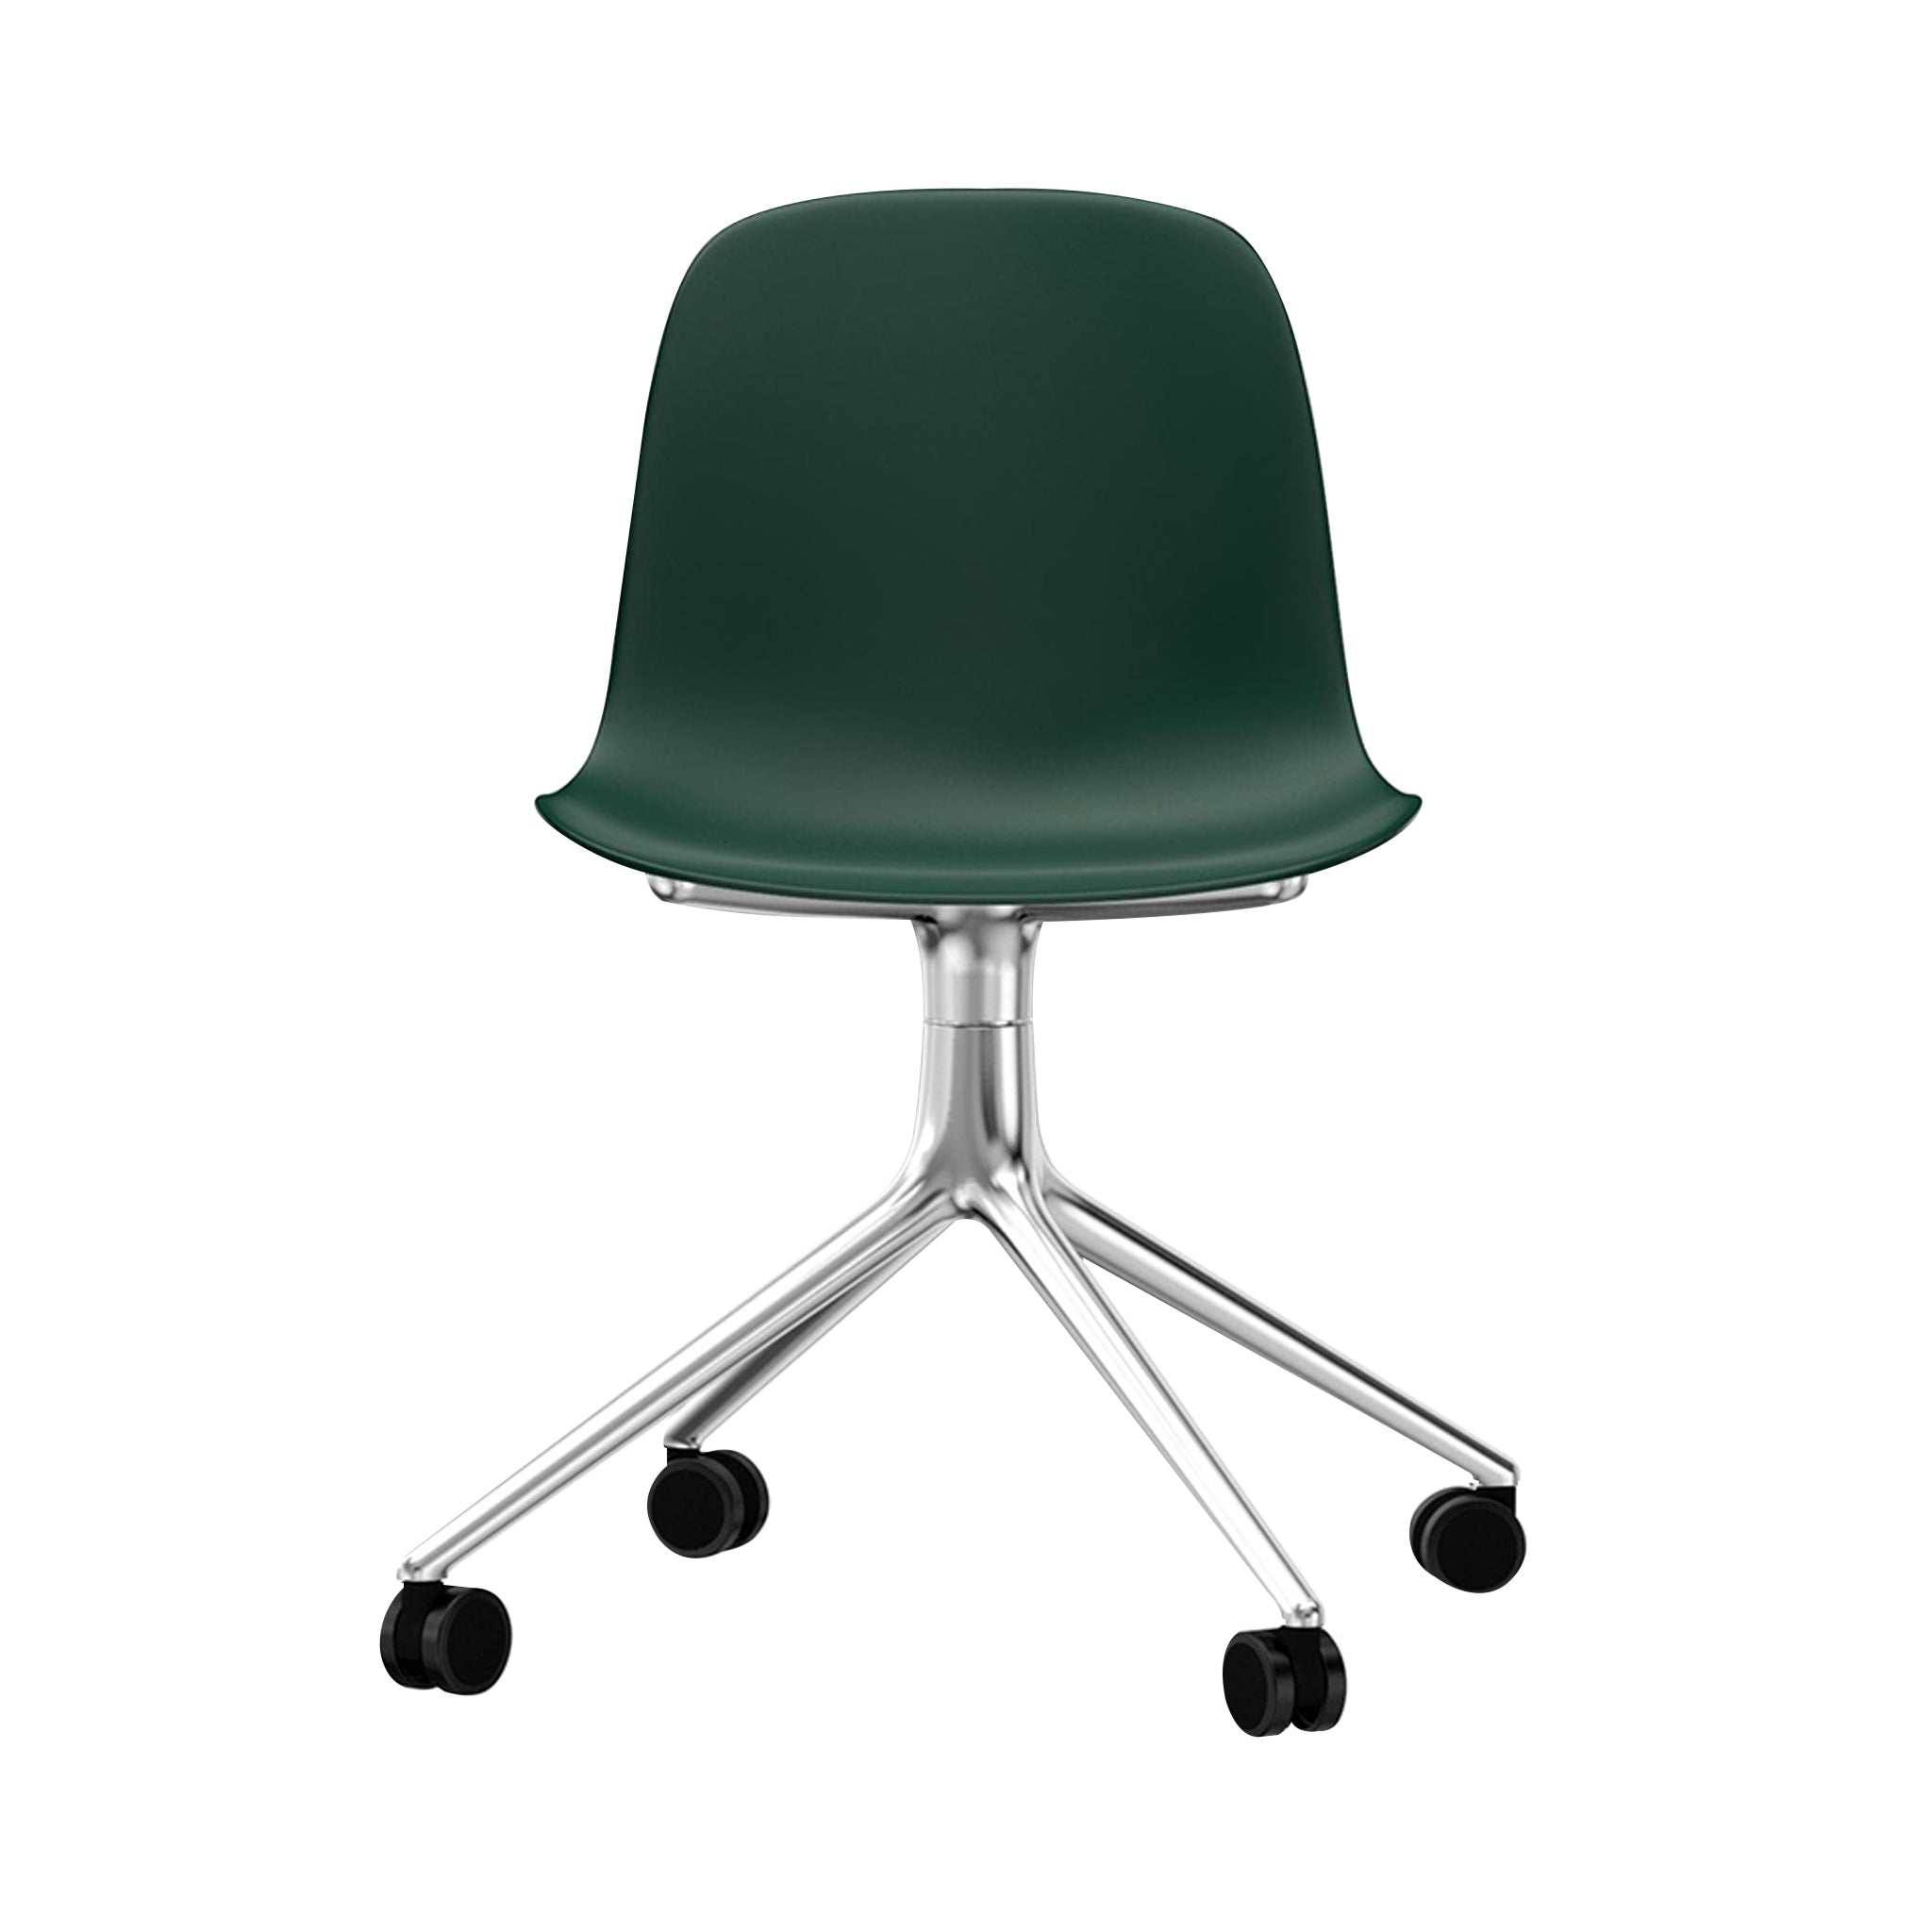 Form Chair: Swivel + Green + Aluminum + With Casters